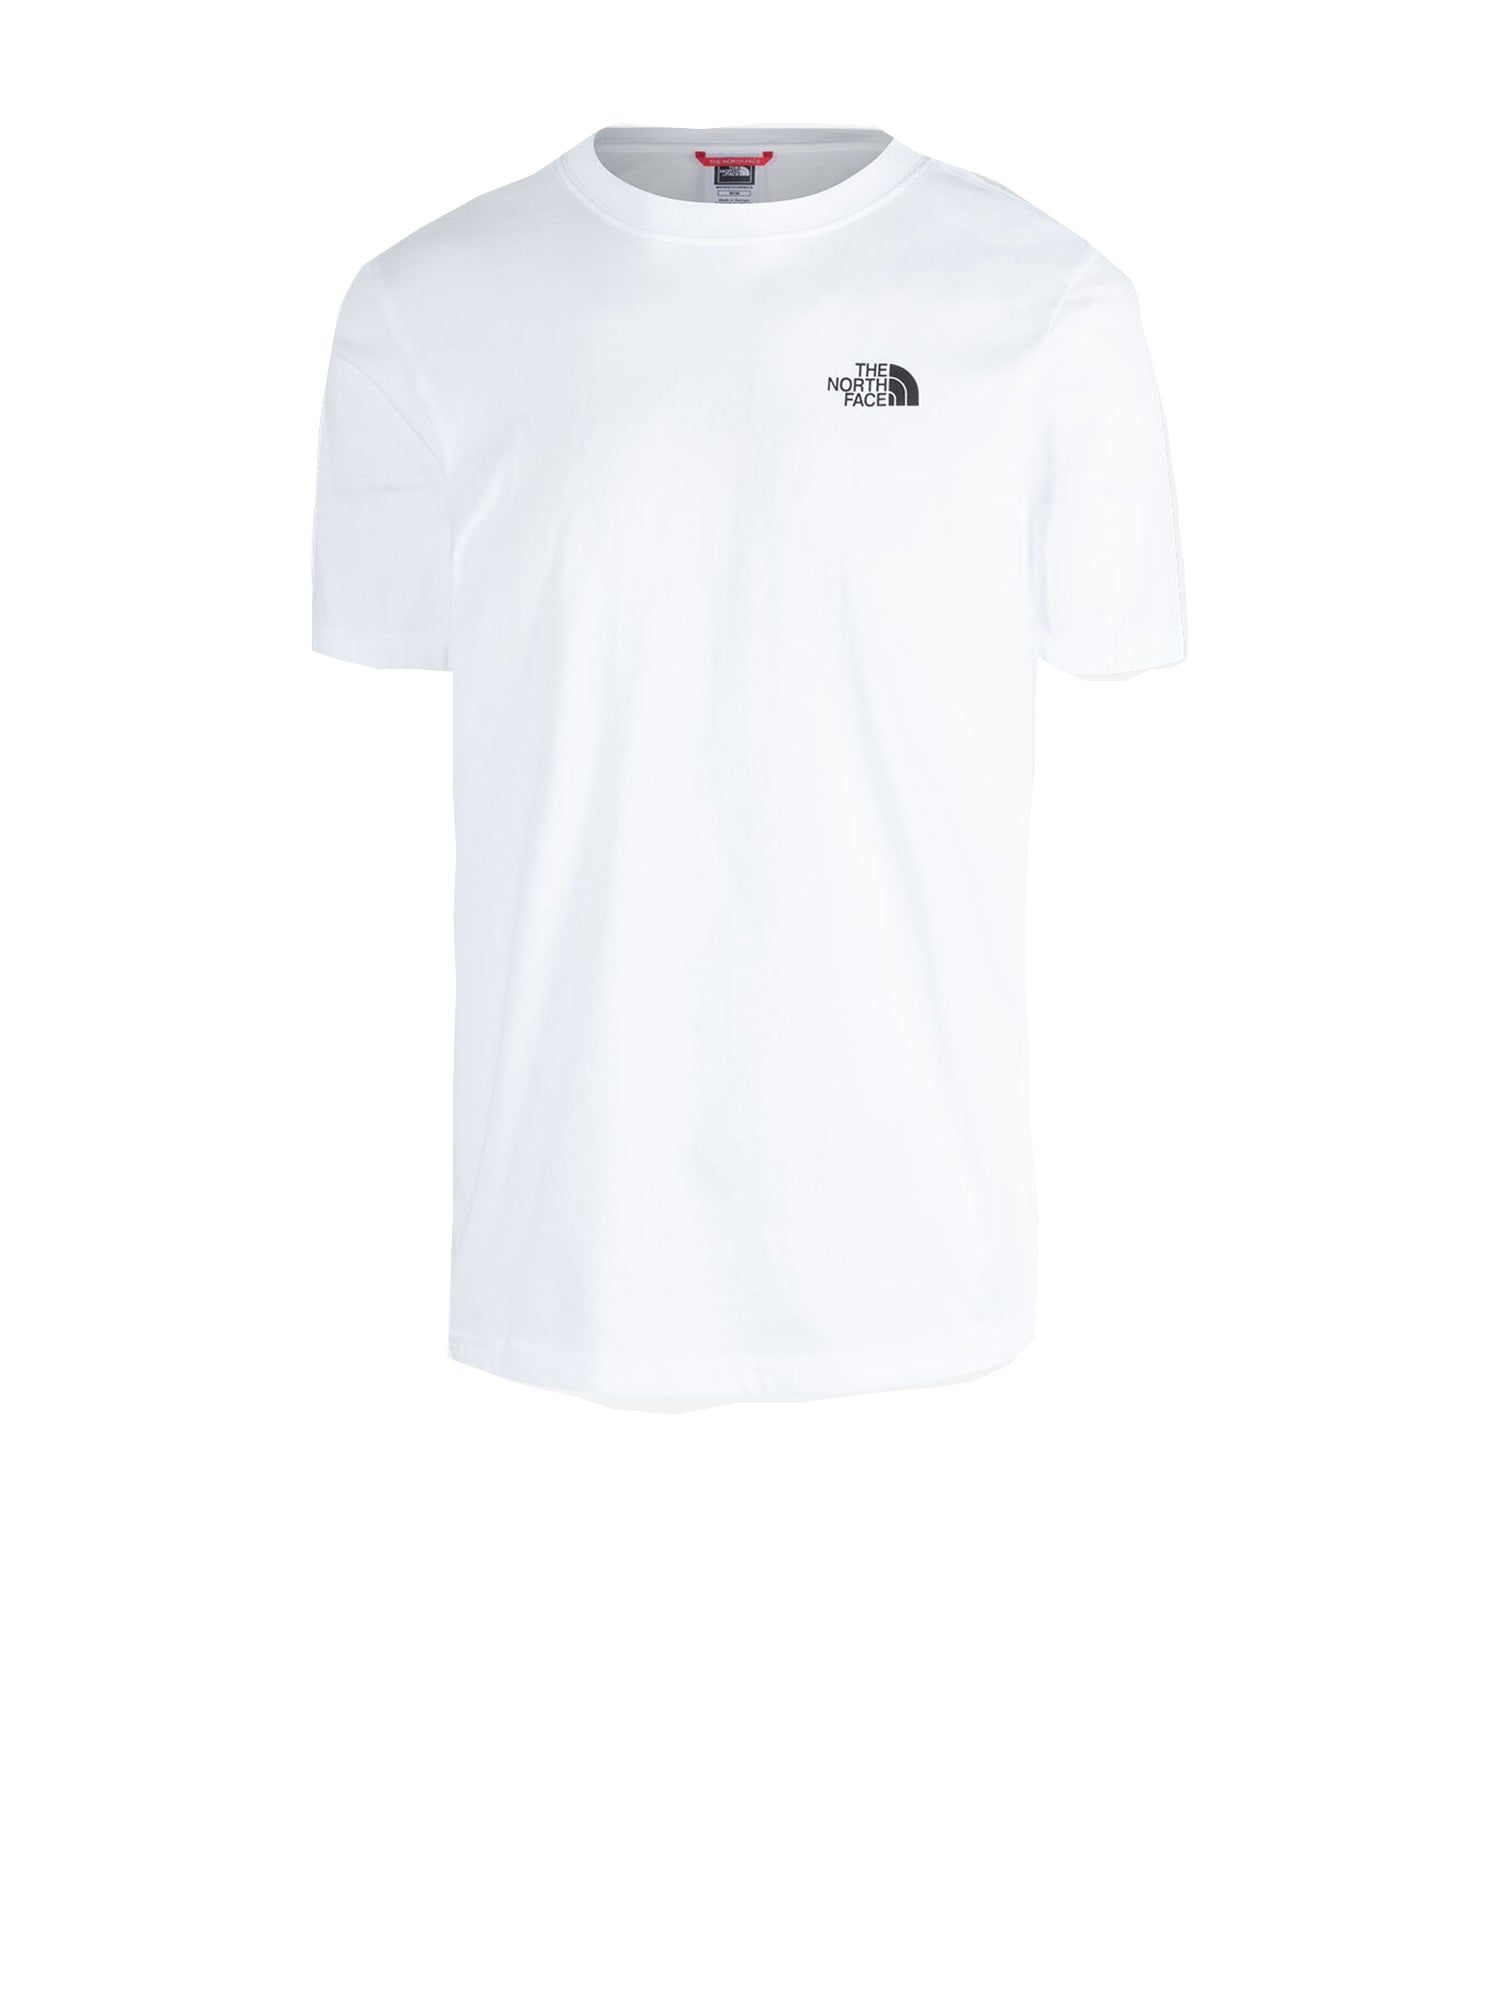 THE NORTH FACE T- SHIRT NEW ODLES BACK LOGO BIANCO